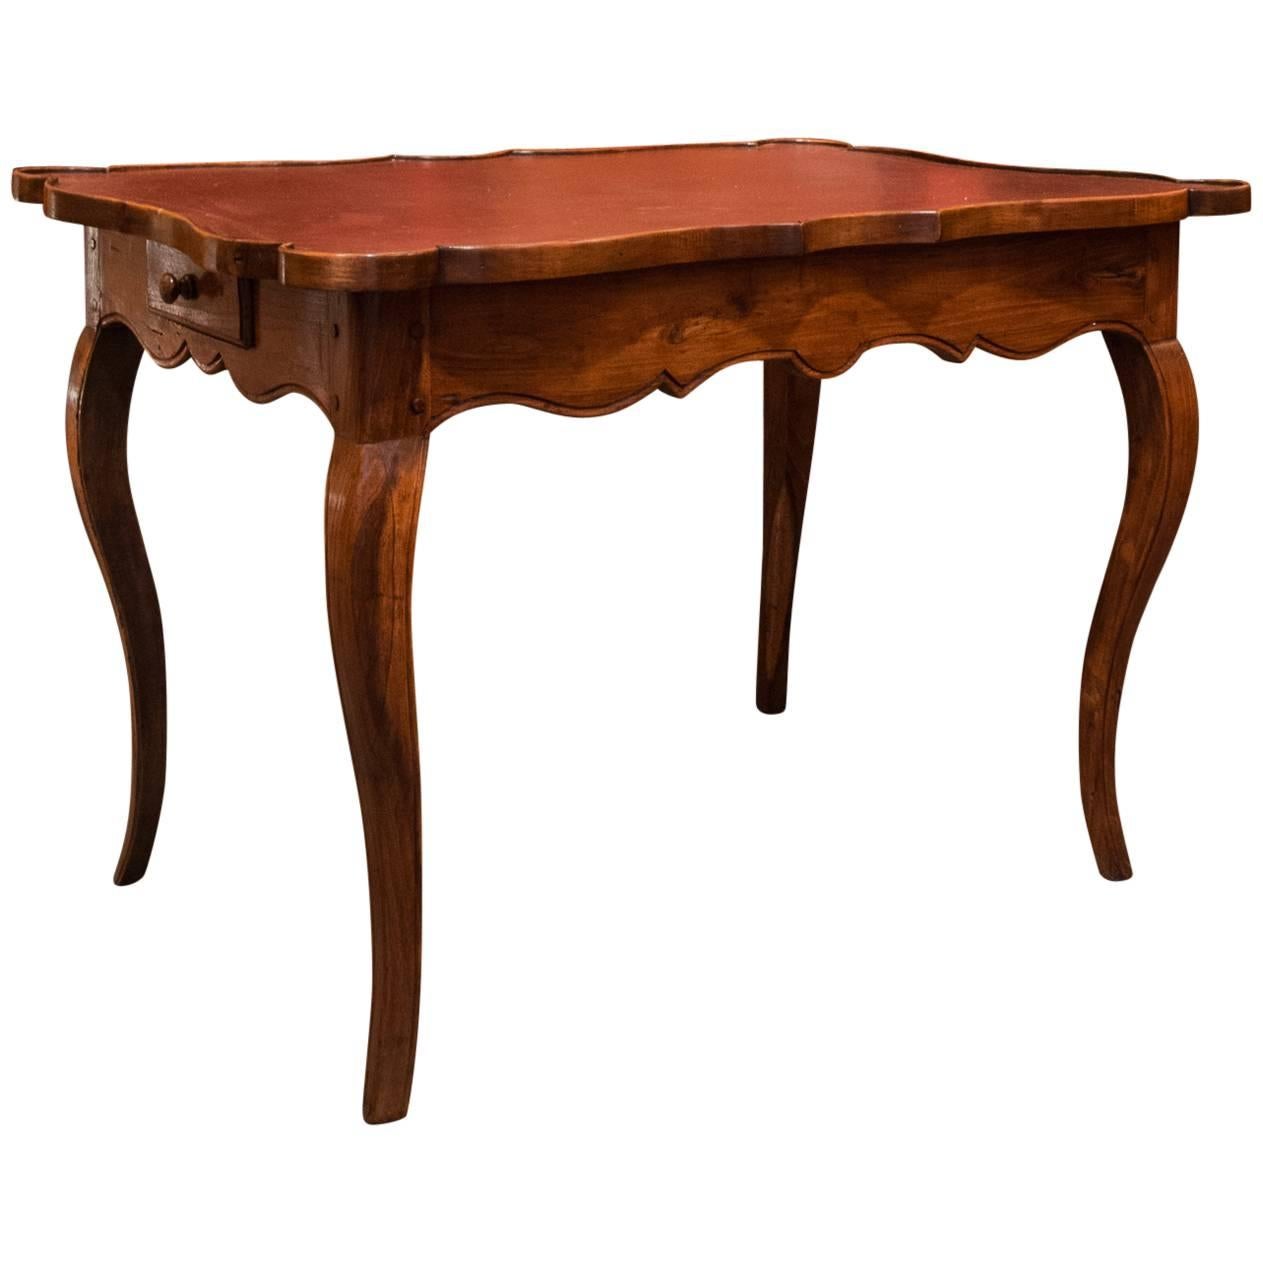 French Louis XV Period, Chesnut Game Table with Leather Top, circa 1740